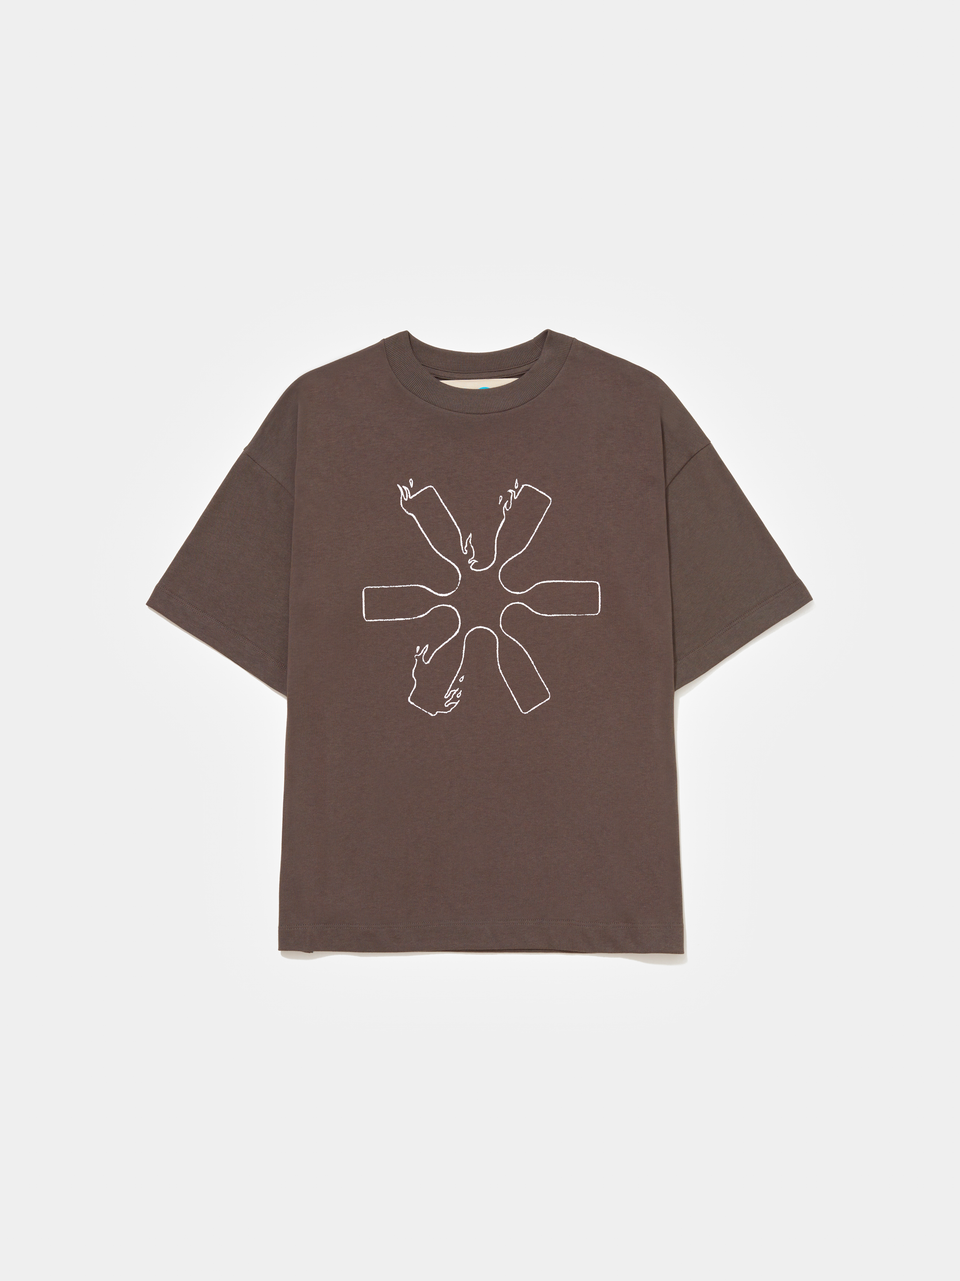 Flame Icons T-Shirt - Brown